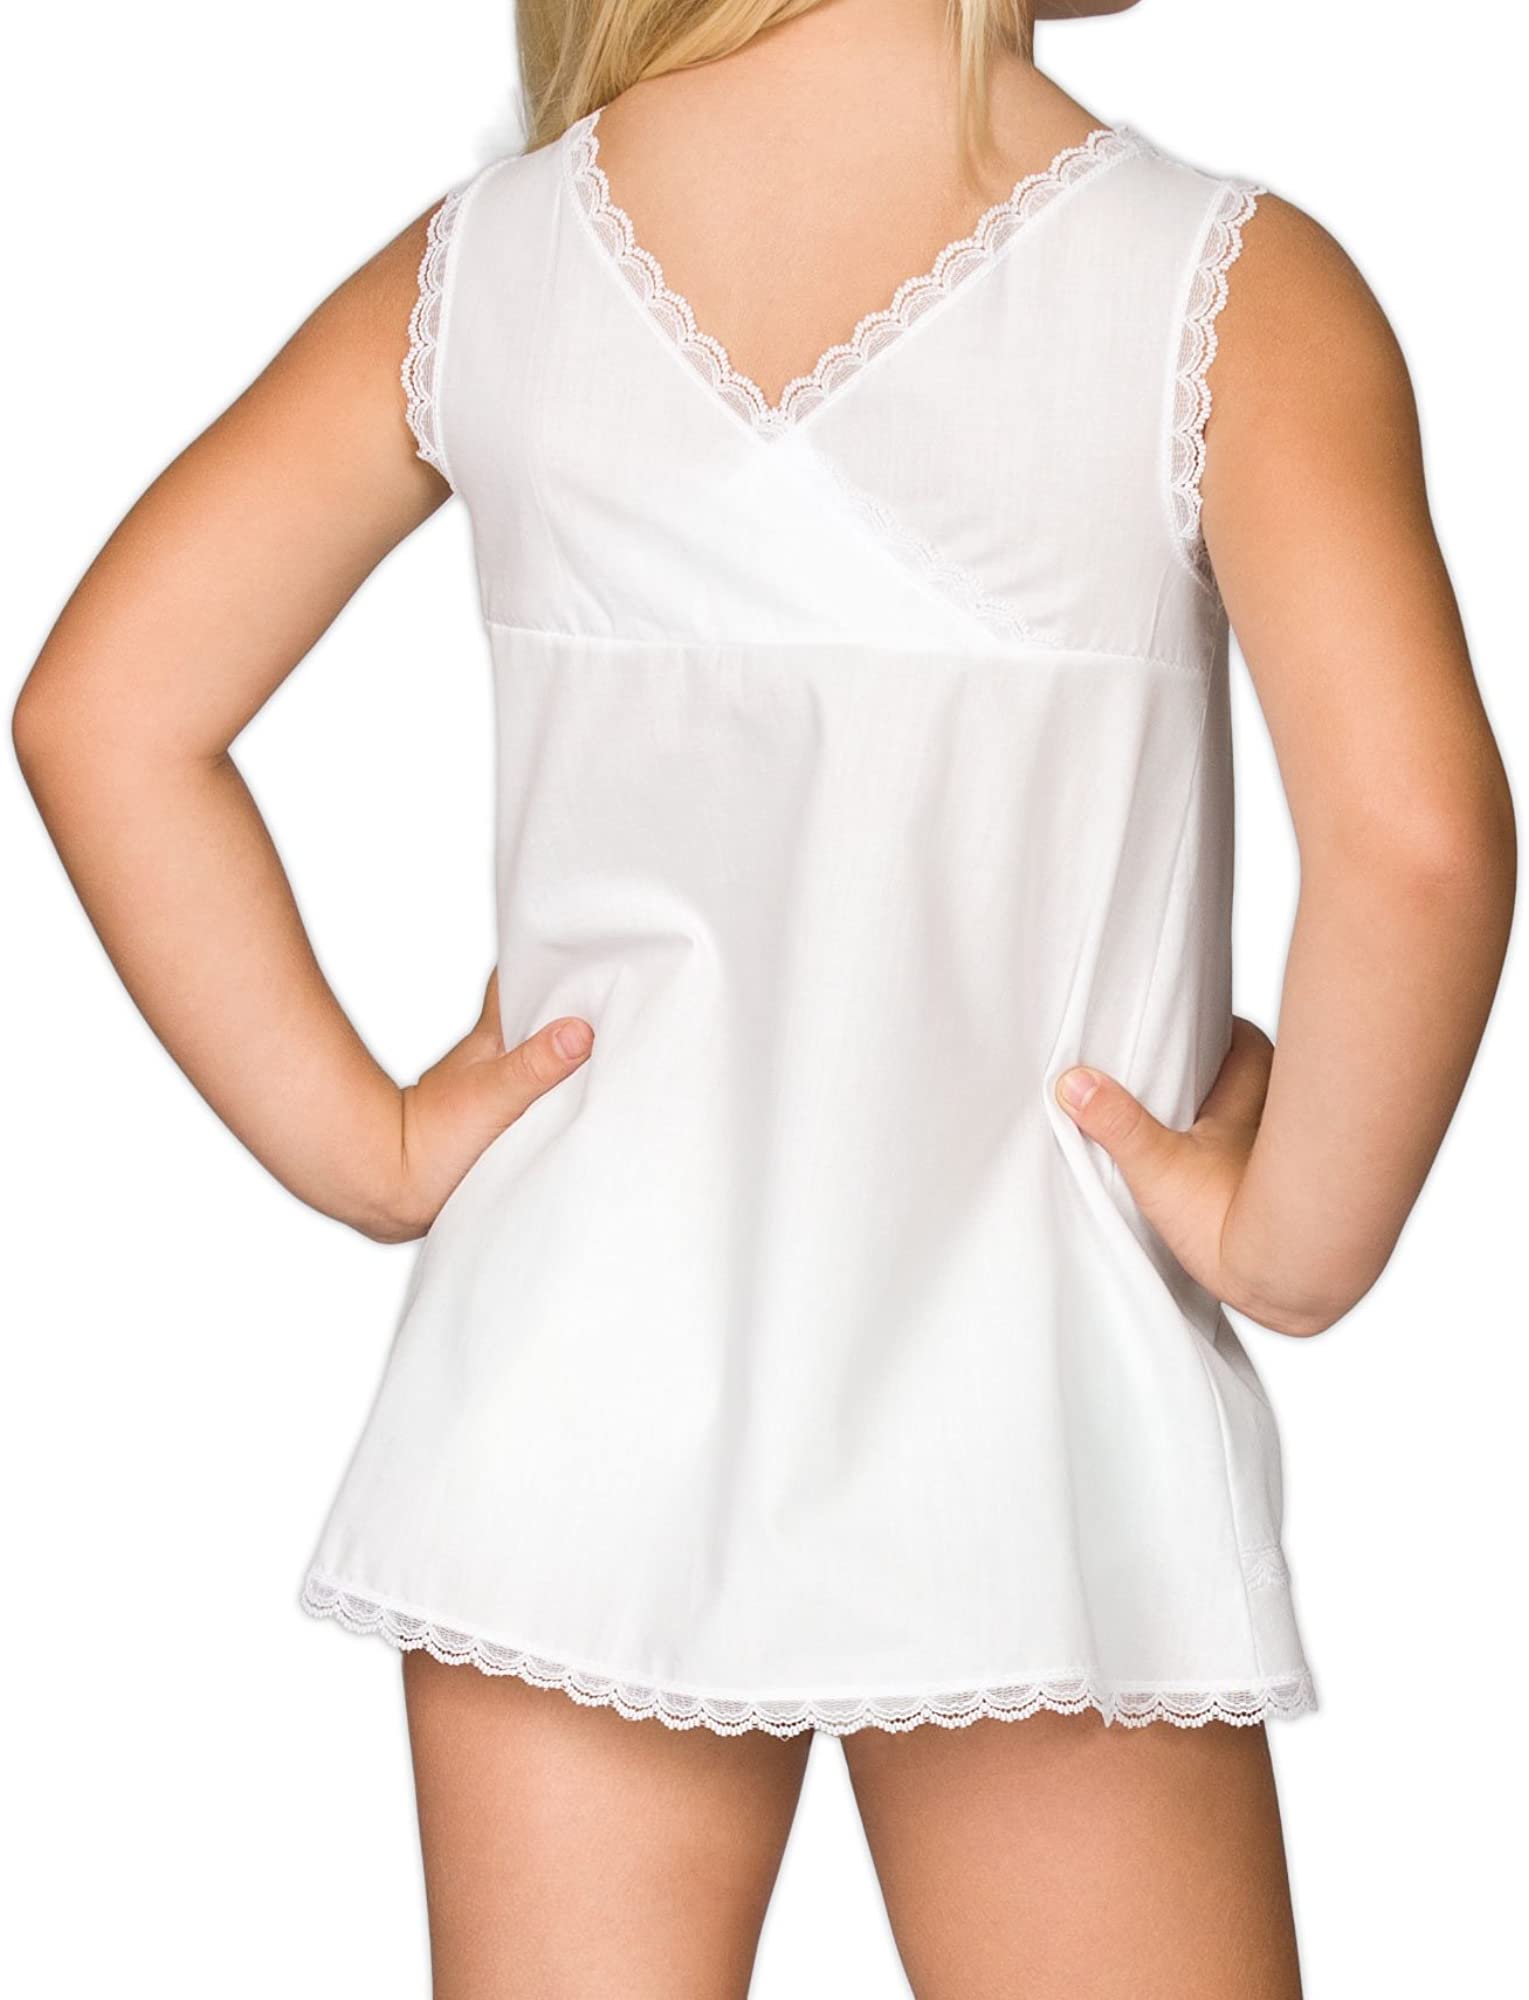 I.C Collections Baby Girls White Simple A-Line Slip 6m 24m